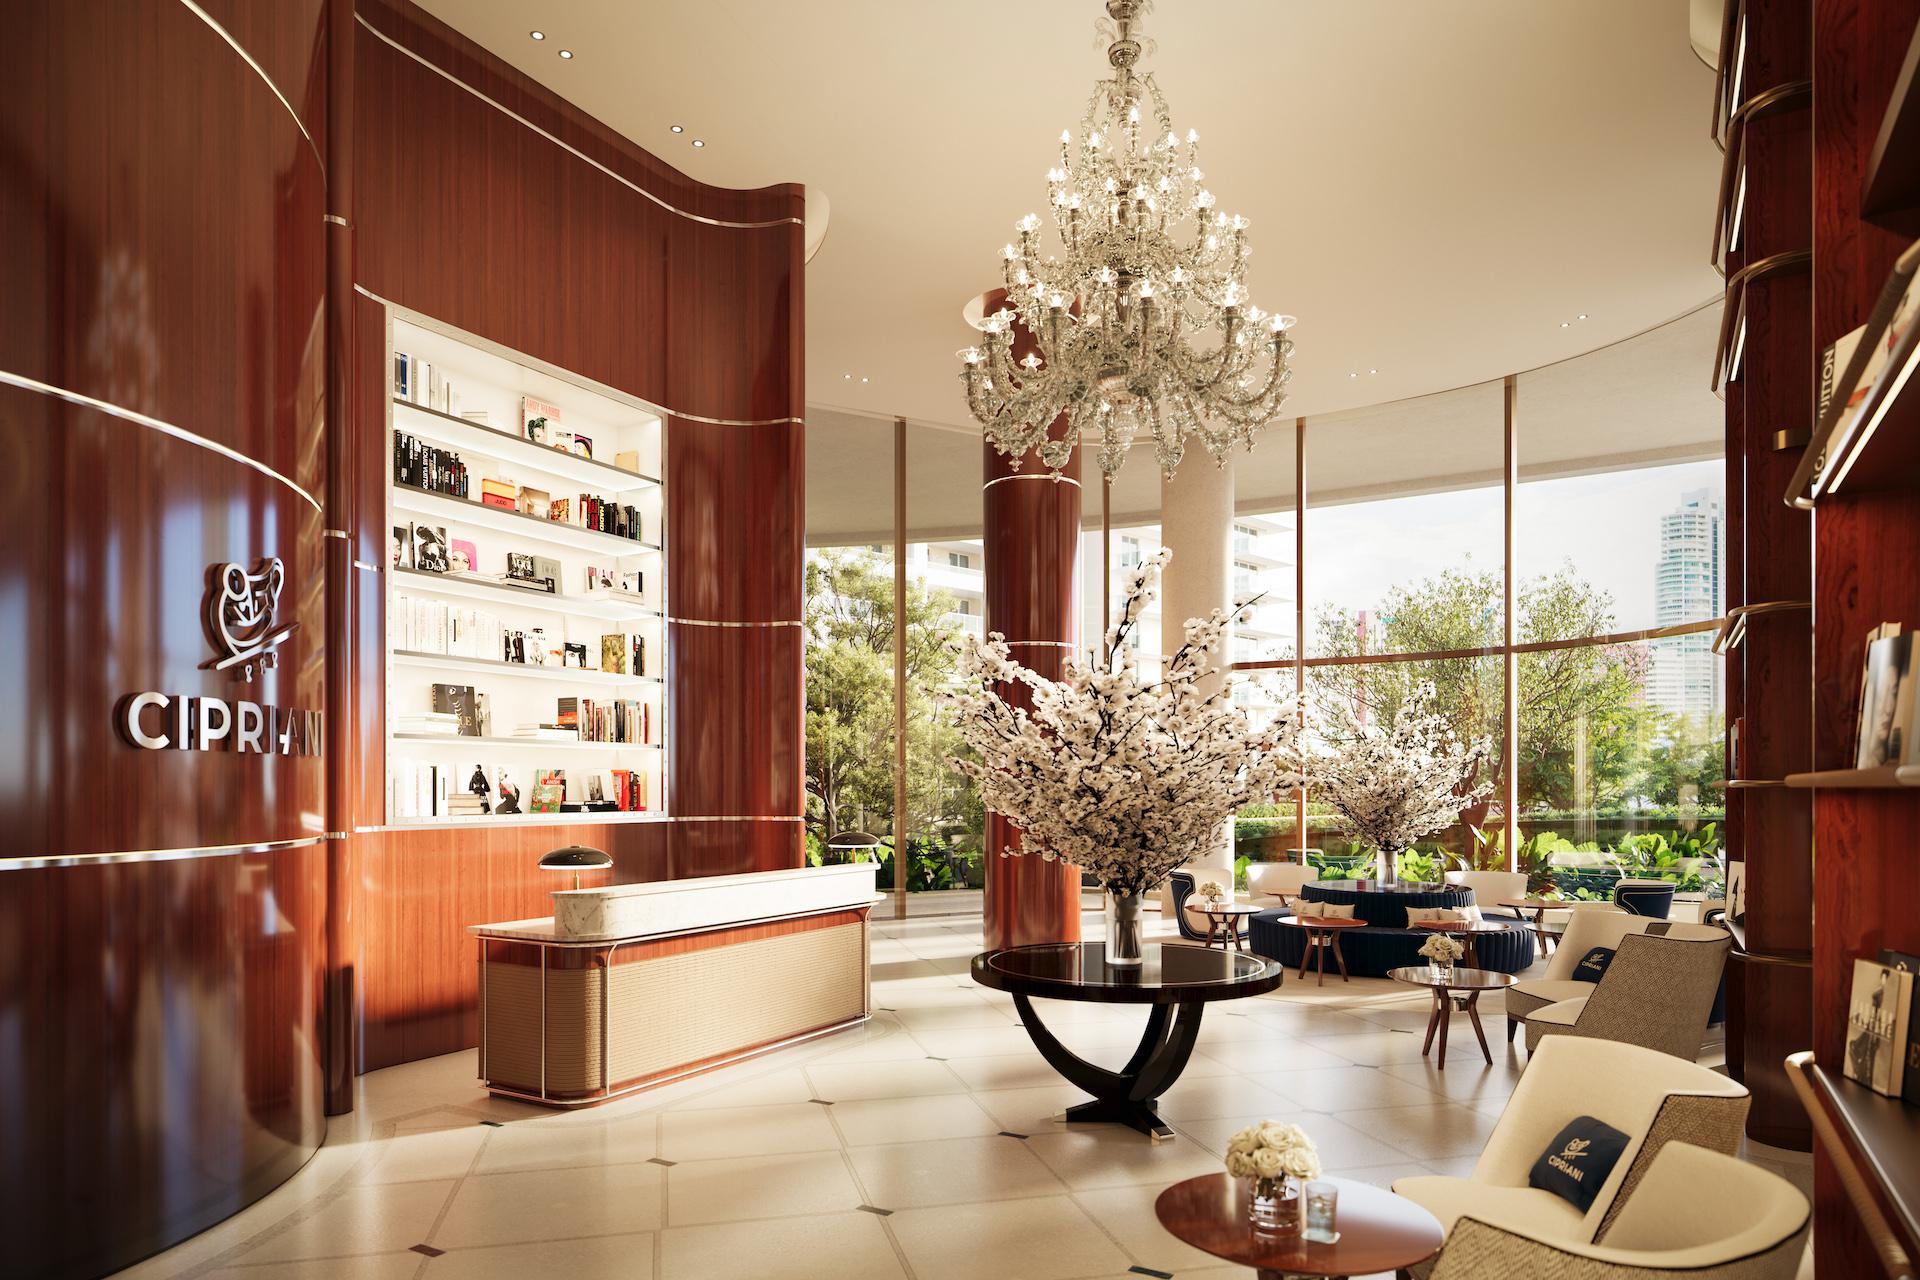 Timeless Italian Style: First Look at Cipriani’s Debut Residence in Miami